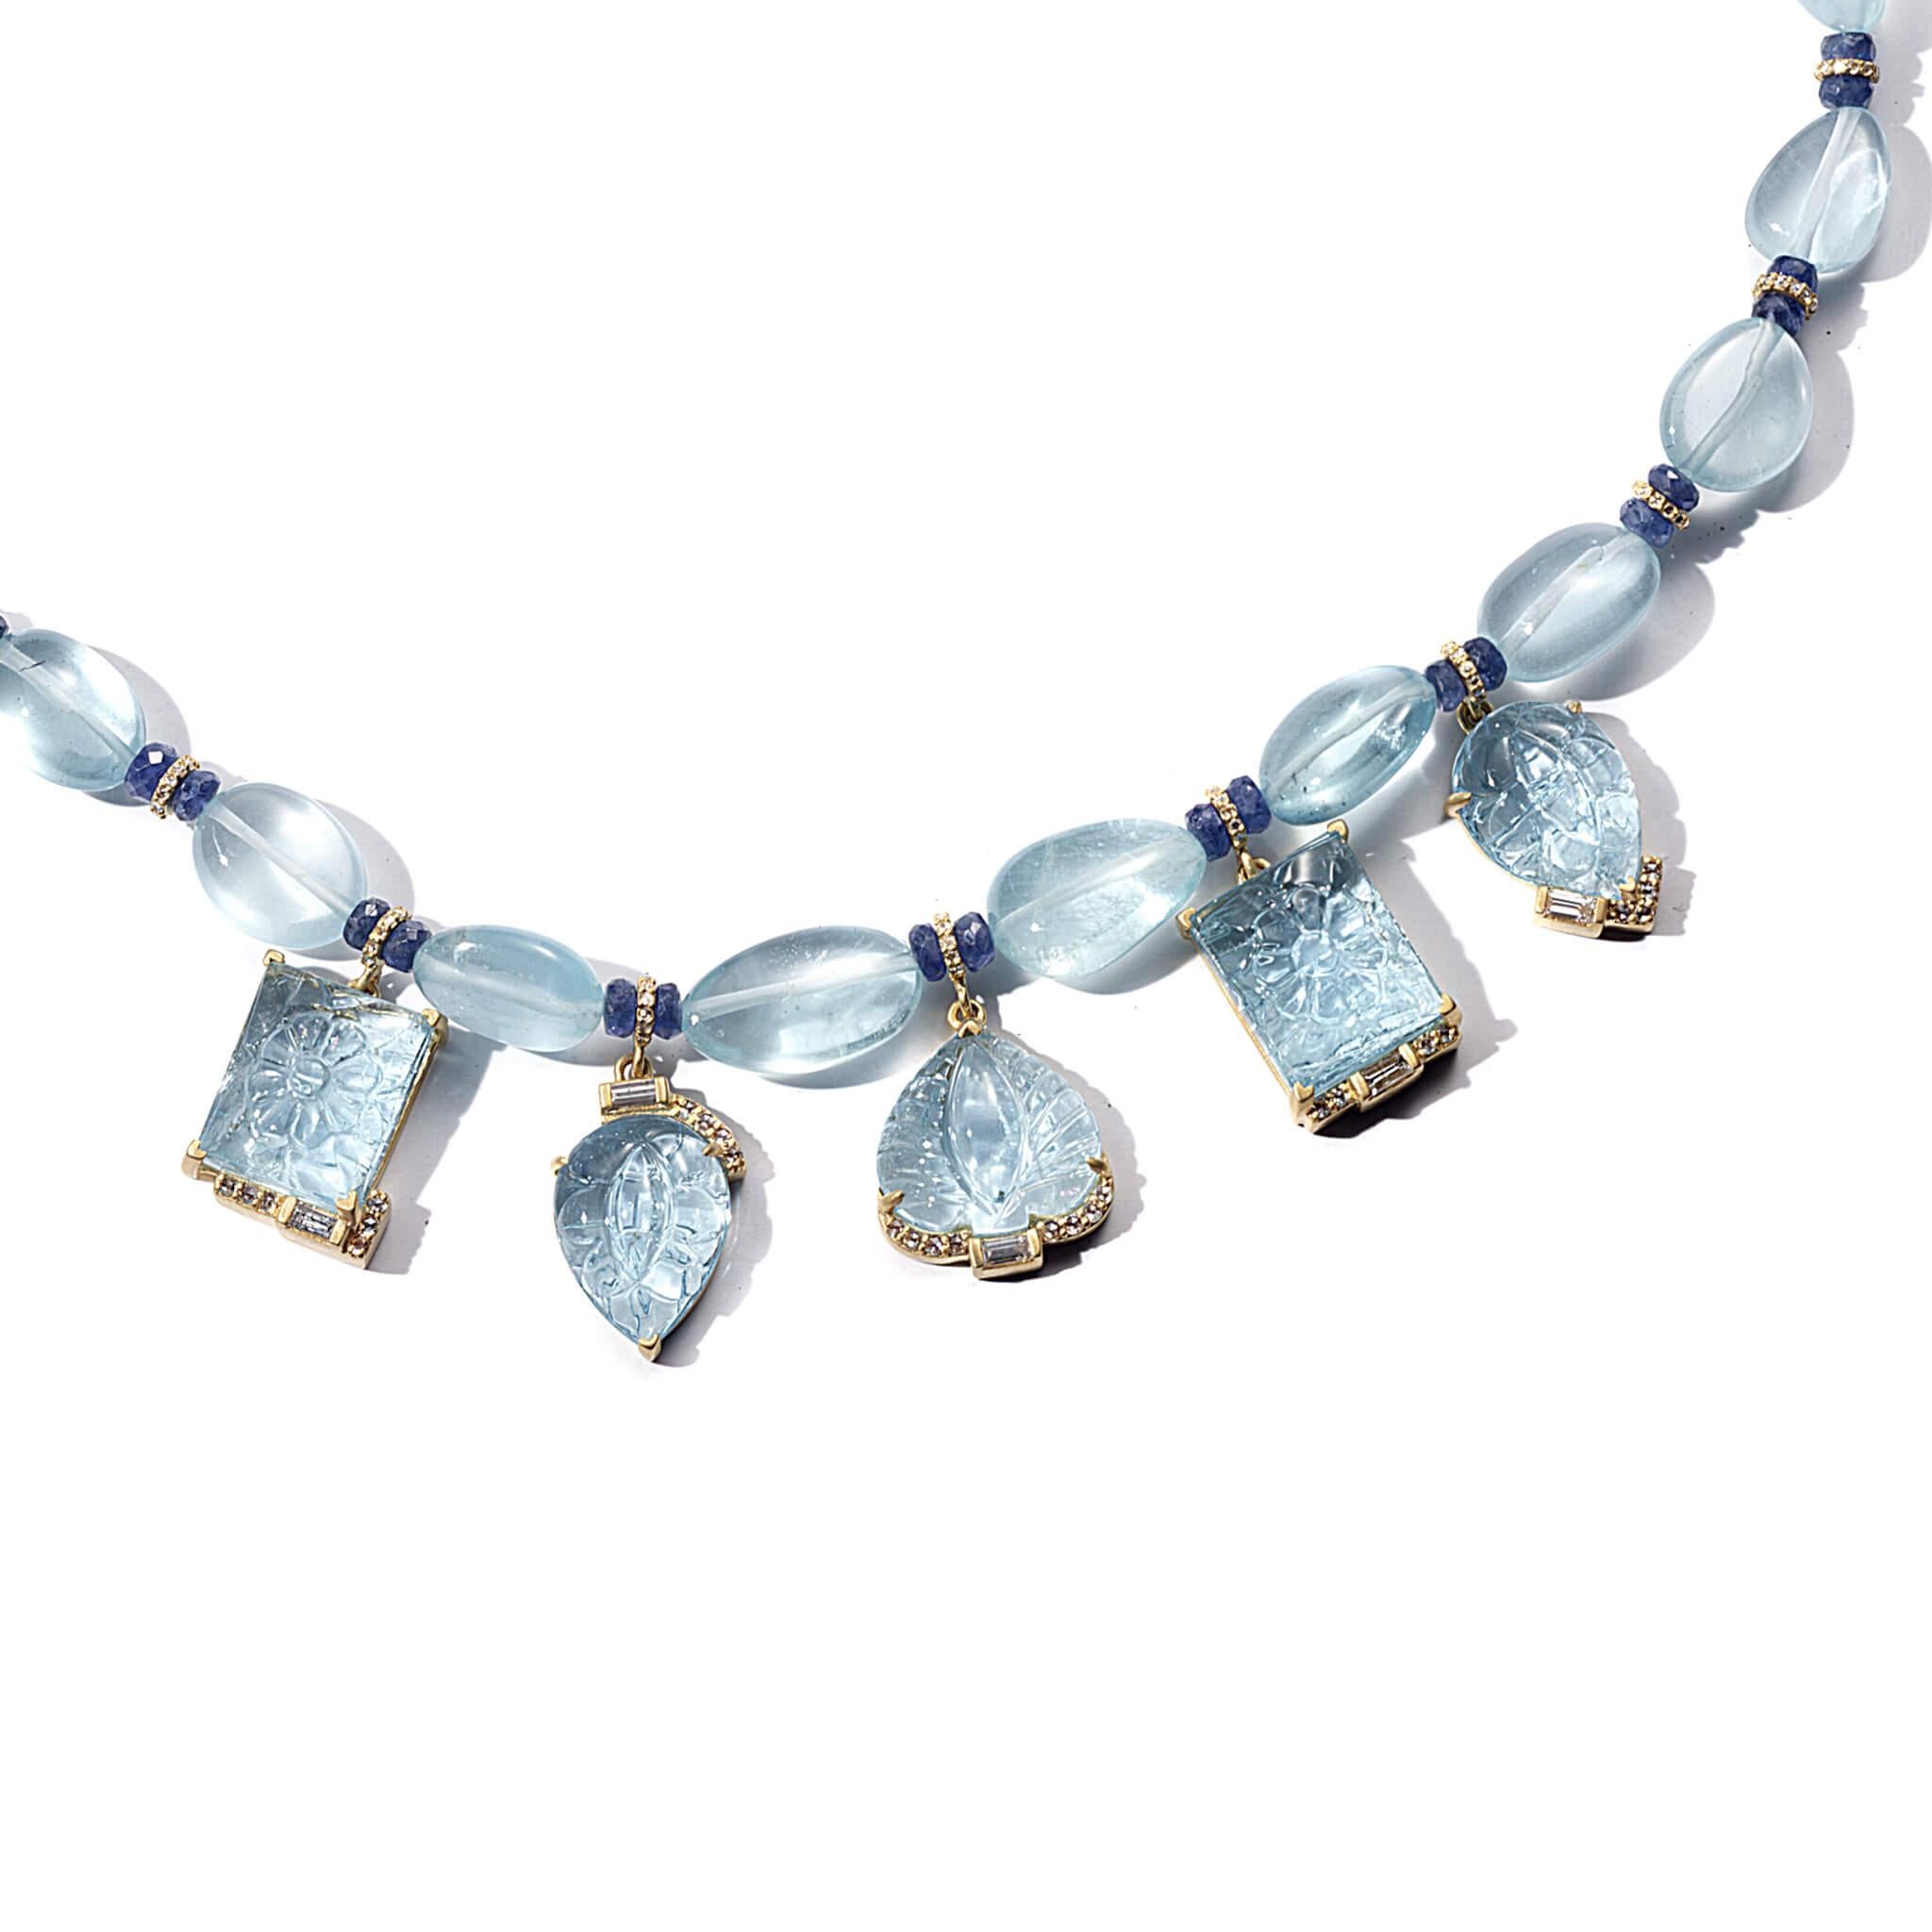 Affinity 16 Inch + Extender Necklace with 109.51CTS of Carved and Beaded Aquamarine, 10.05CTS of Blue Sapphire Beads, and 1.68CTS of Diamonds. Set in 20K Gold.